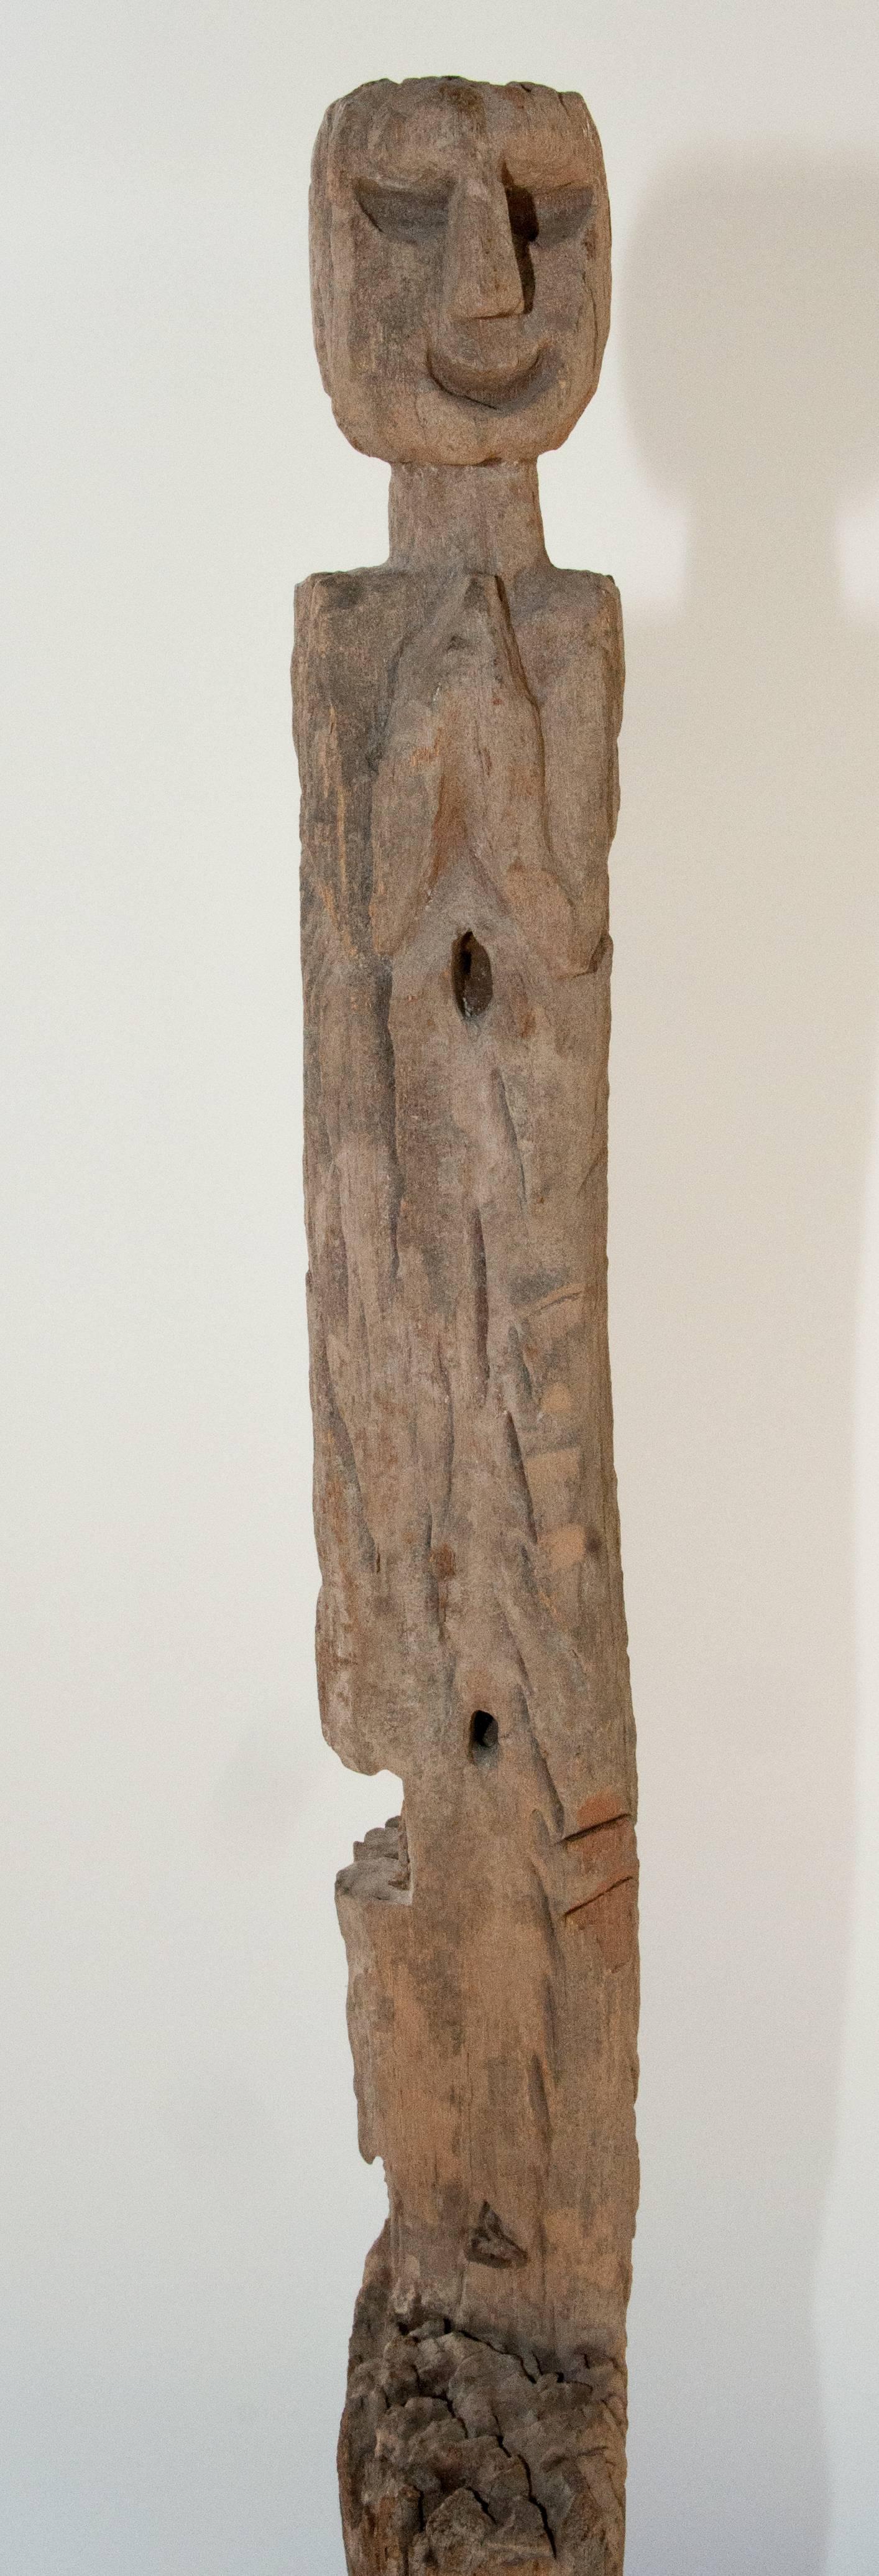 Tribal marking post. Spring marker. Tharu of Nepal, mid-20th century. Metal base
Offered by Bruce Hughes.
This wonderfully eroded ritual post was set in the ground and would most probably have marked a spring or water source. Long years of exposure